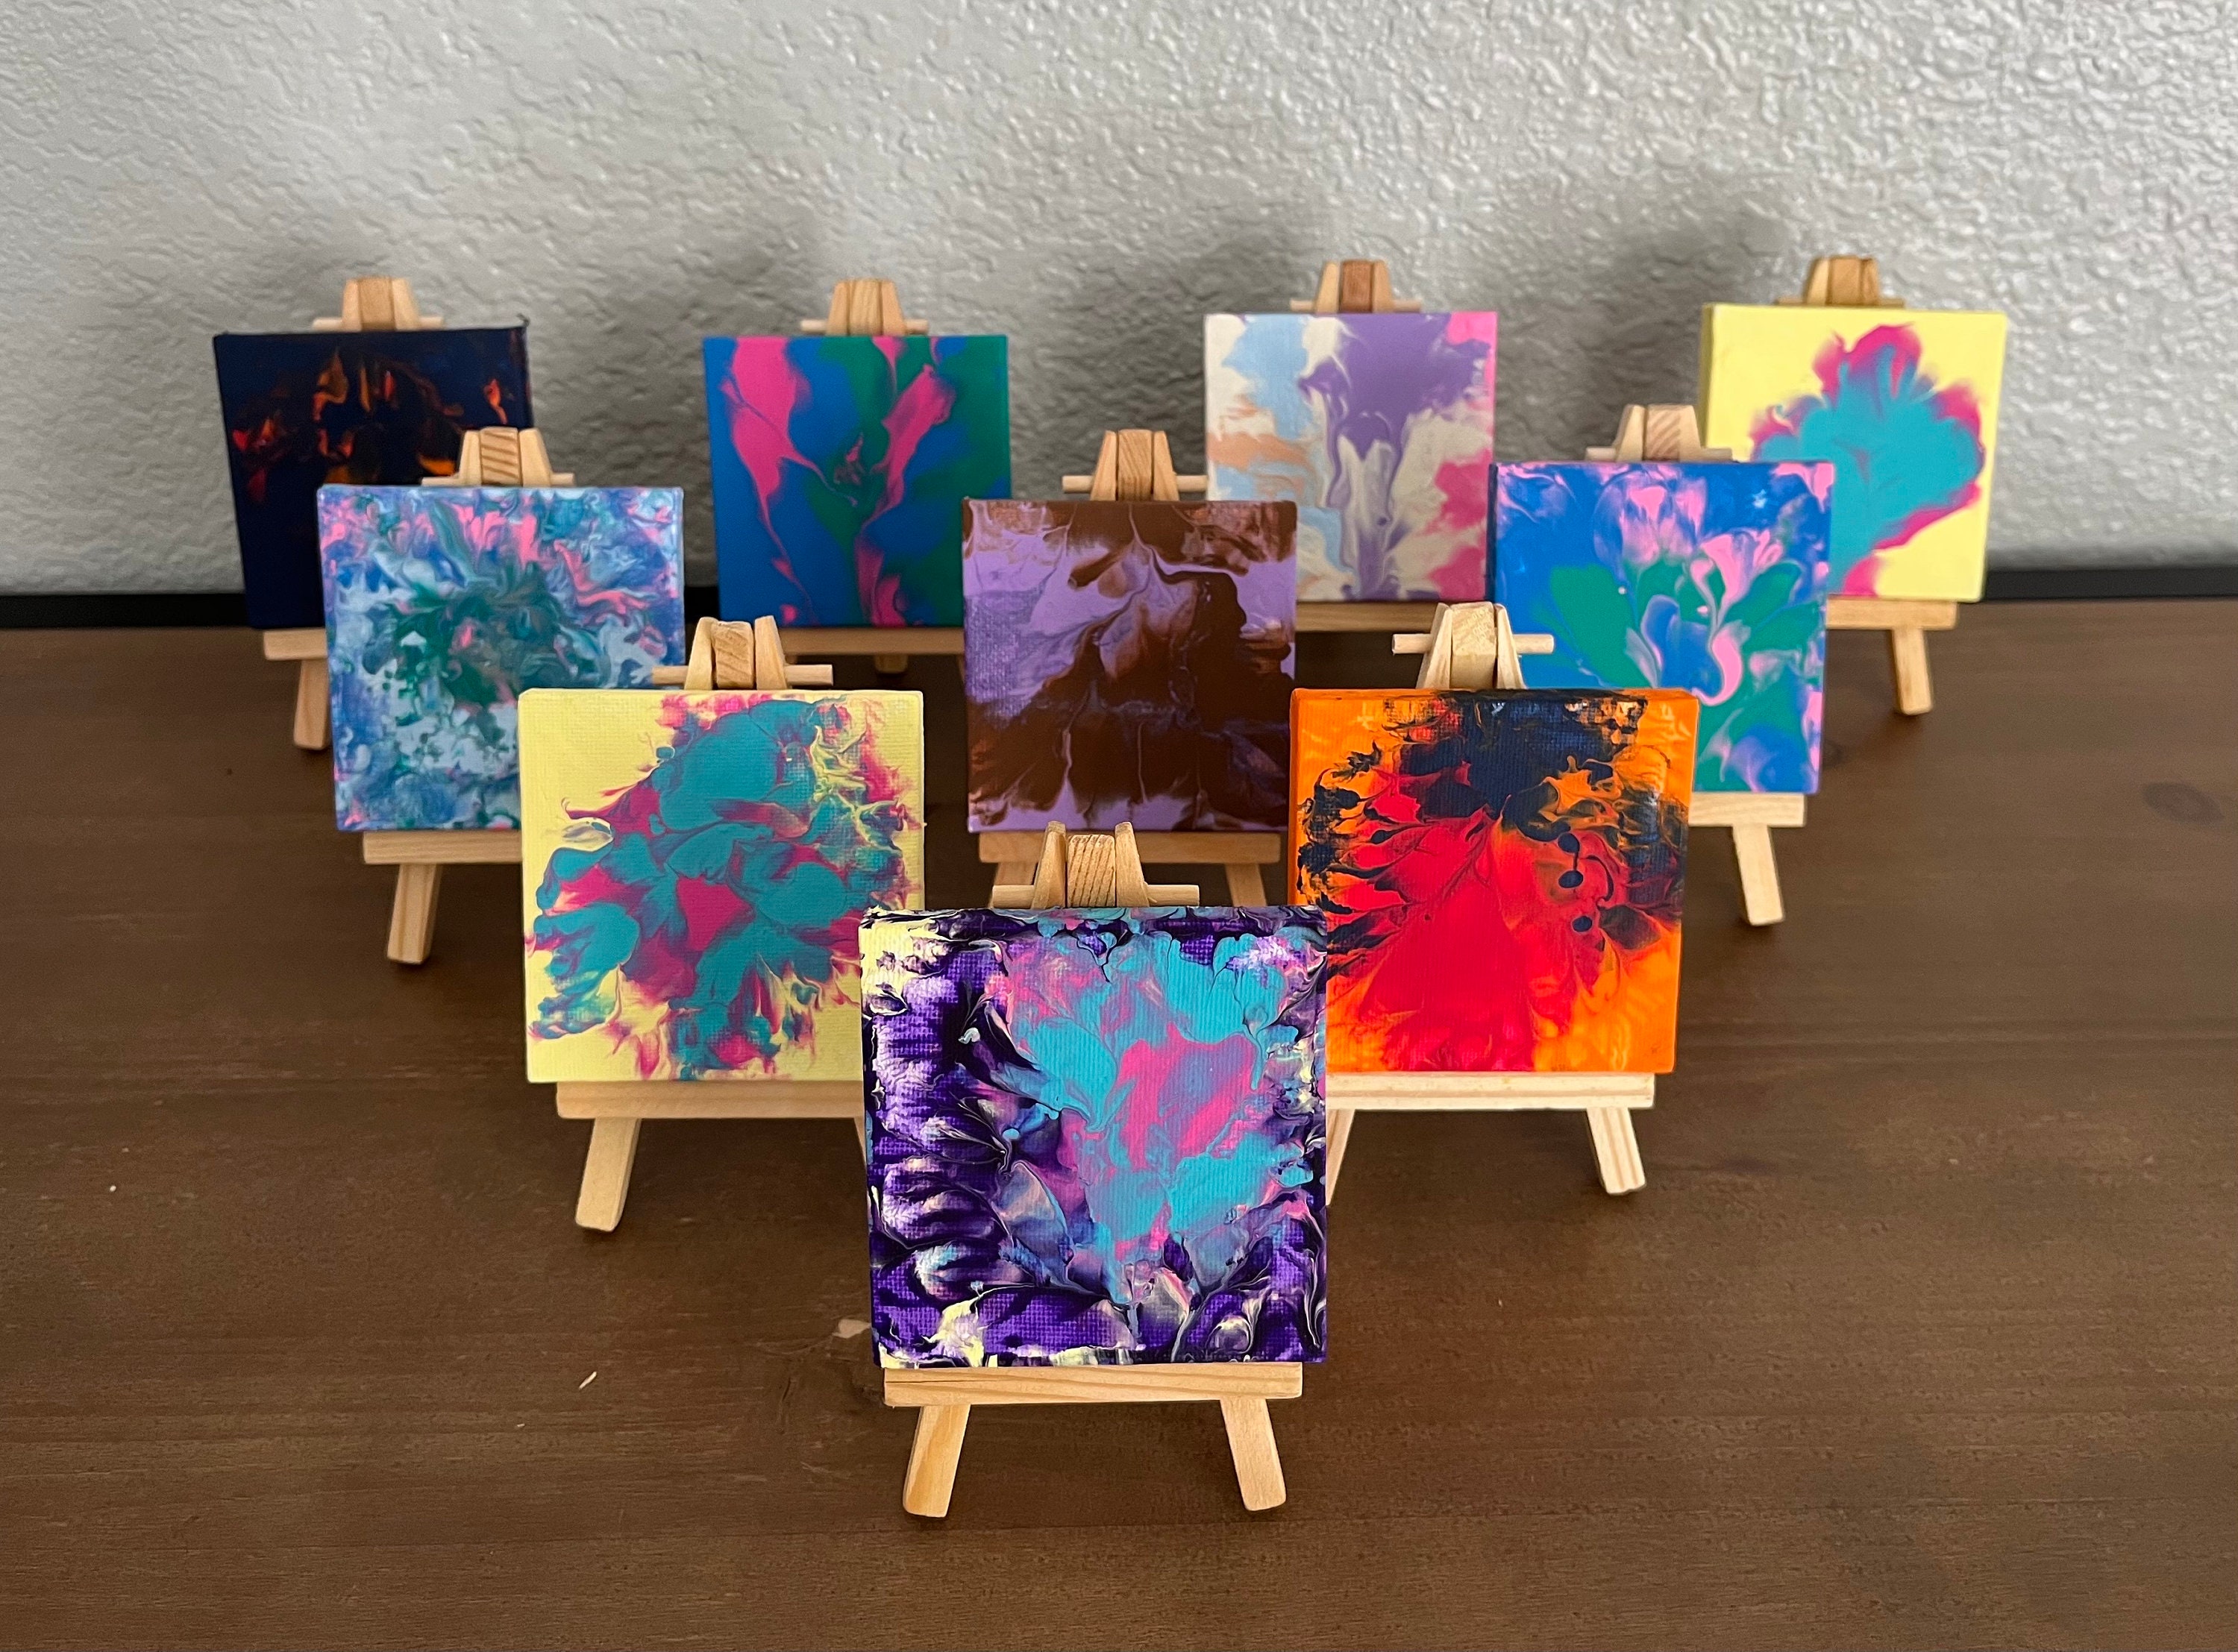  20 Pack 4x4 in Mini Canvases, Small Stretched Painting Canvas  Panel with Mini Easel, Art Canvas Painting Kit with 10 Brushes & 5 Paint  Tray for Kids Teenagers Acrylic Pouring Oil